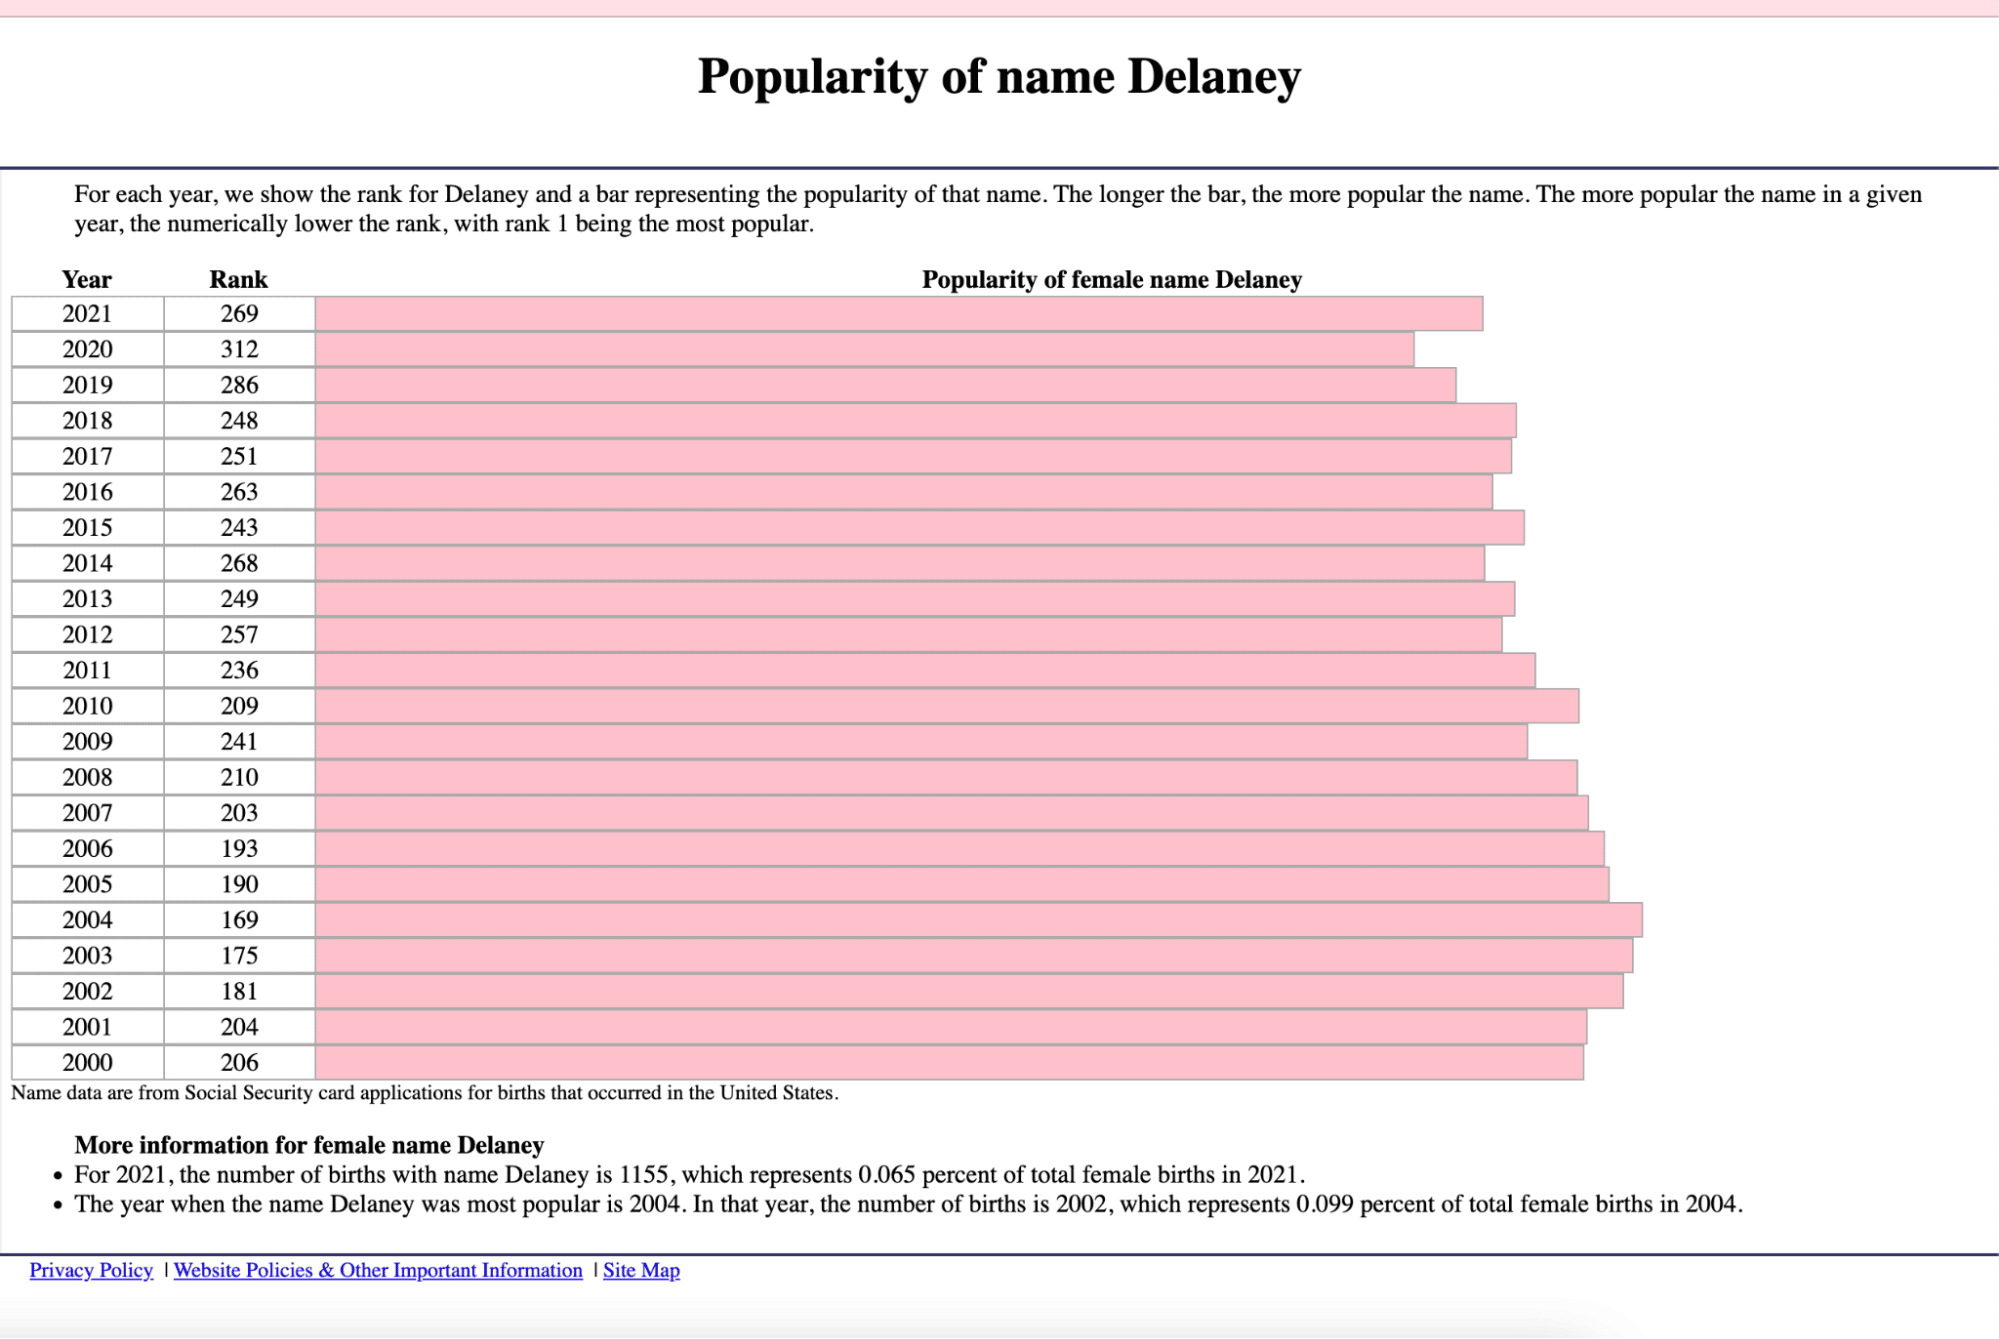 Popularity of the name Delaney